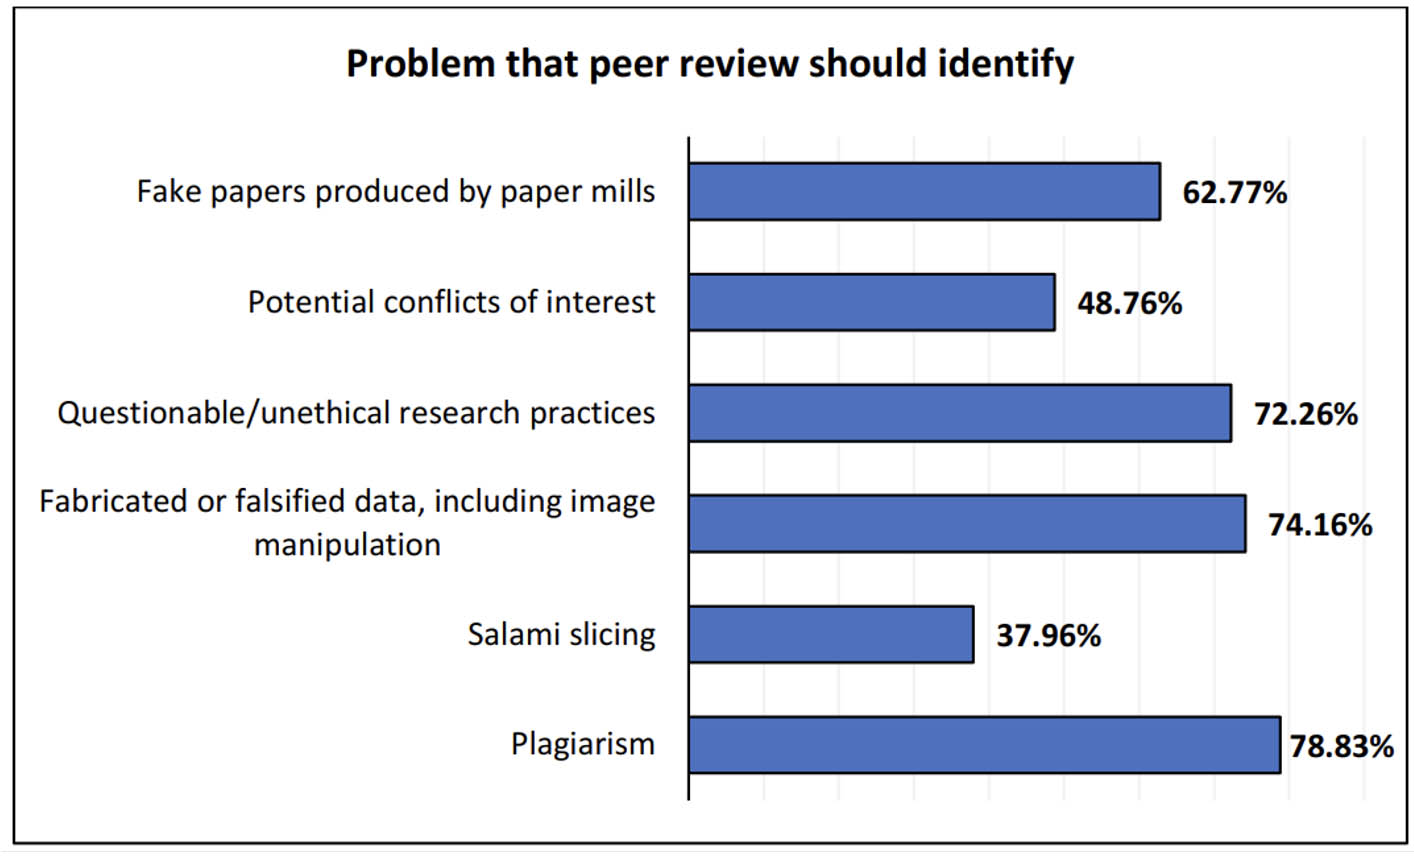 Unveiling Perspectives on Peer Review and Research Integrity: Survey Insights – The Scholarly Kitchen